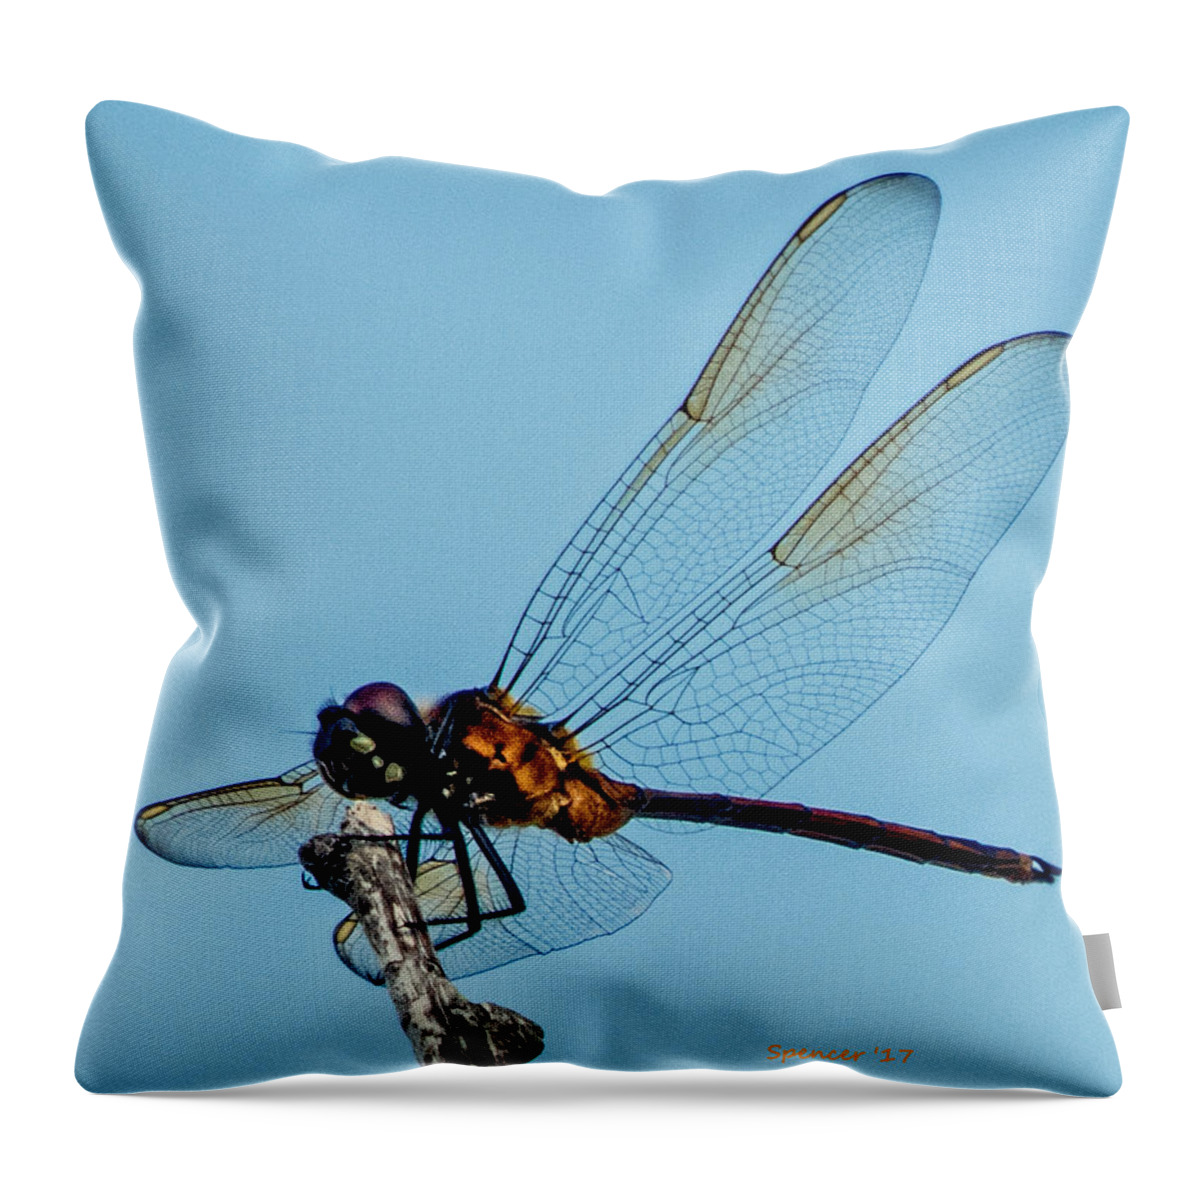 Florida Throw Pillow featuring the photograph Details by T Guy Spencer